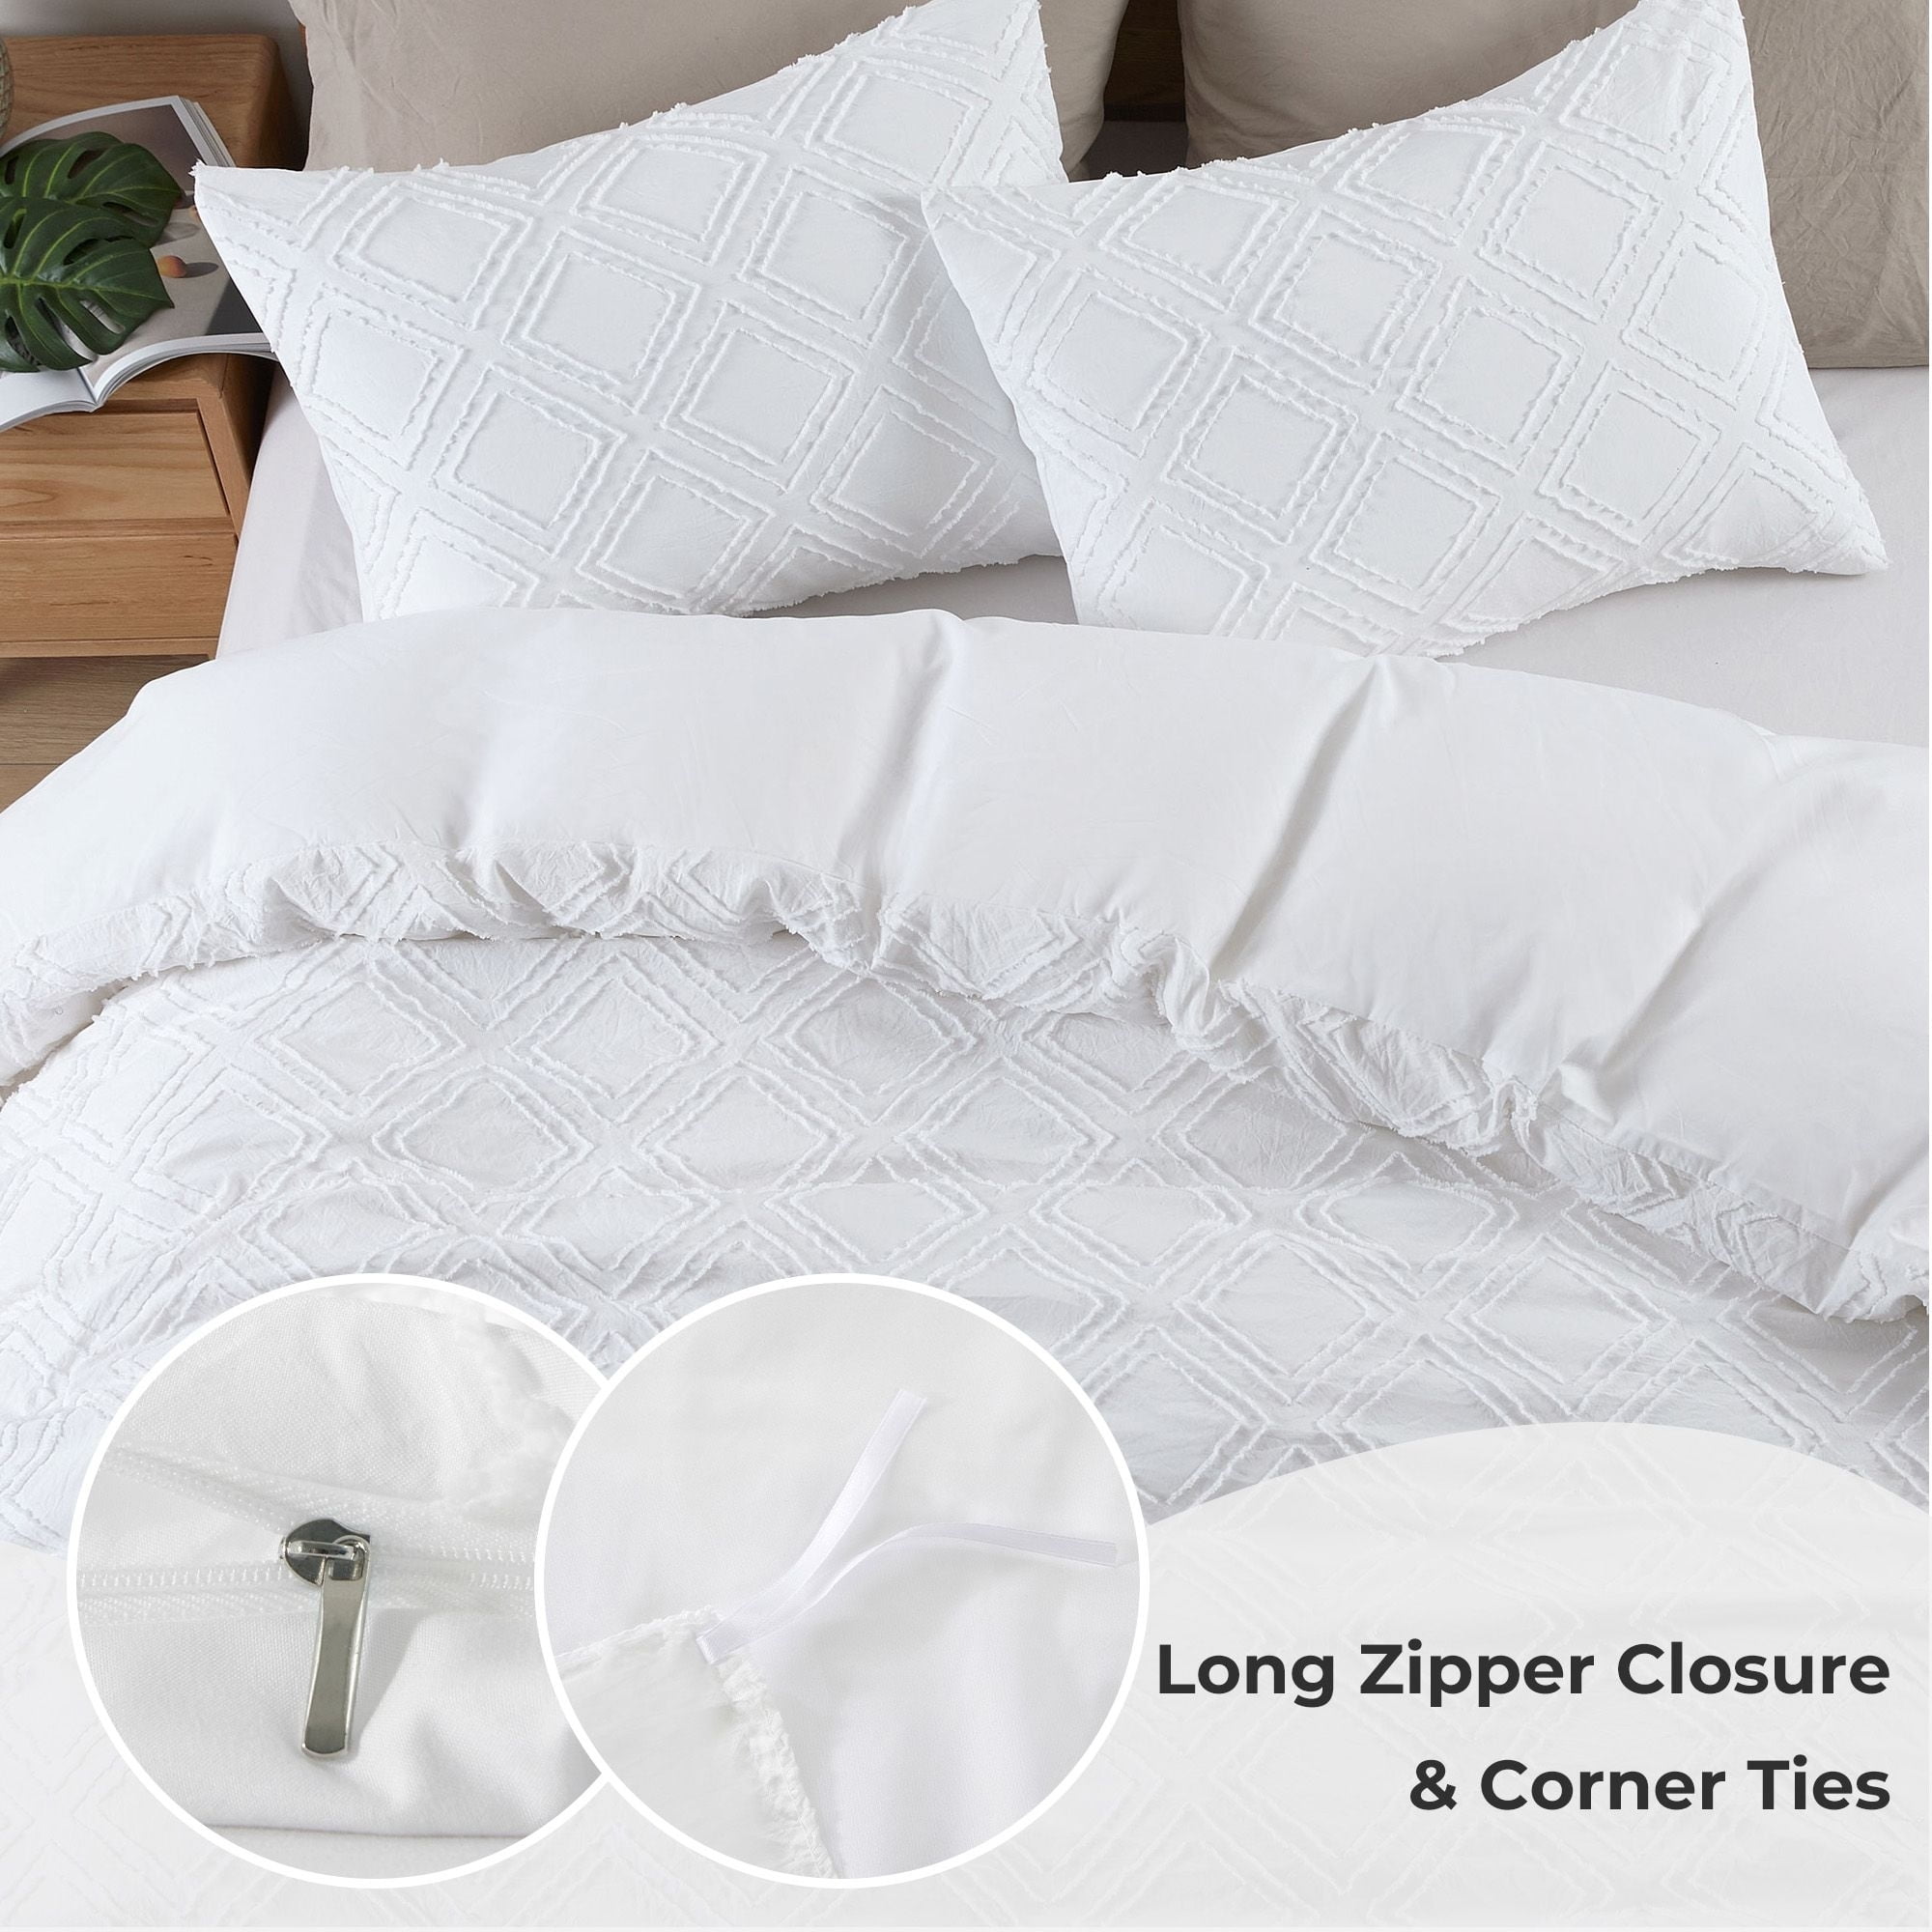 Wave Clipped Duvet Cover Set with Zipper Closure, Twin - Kroger